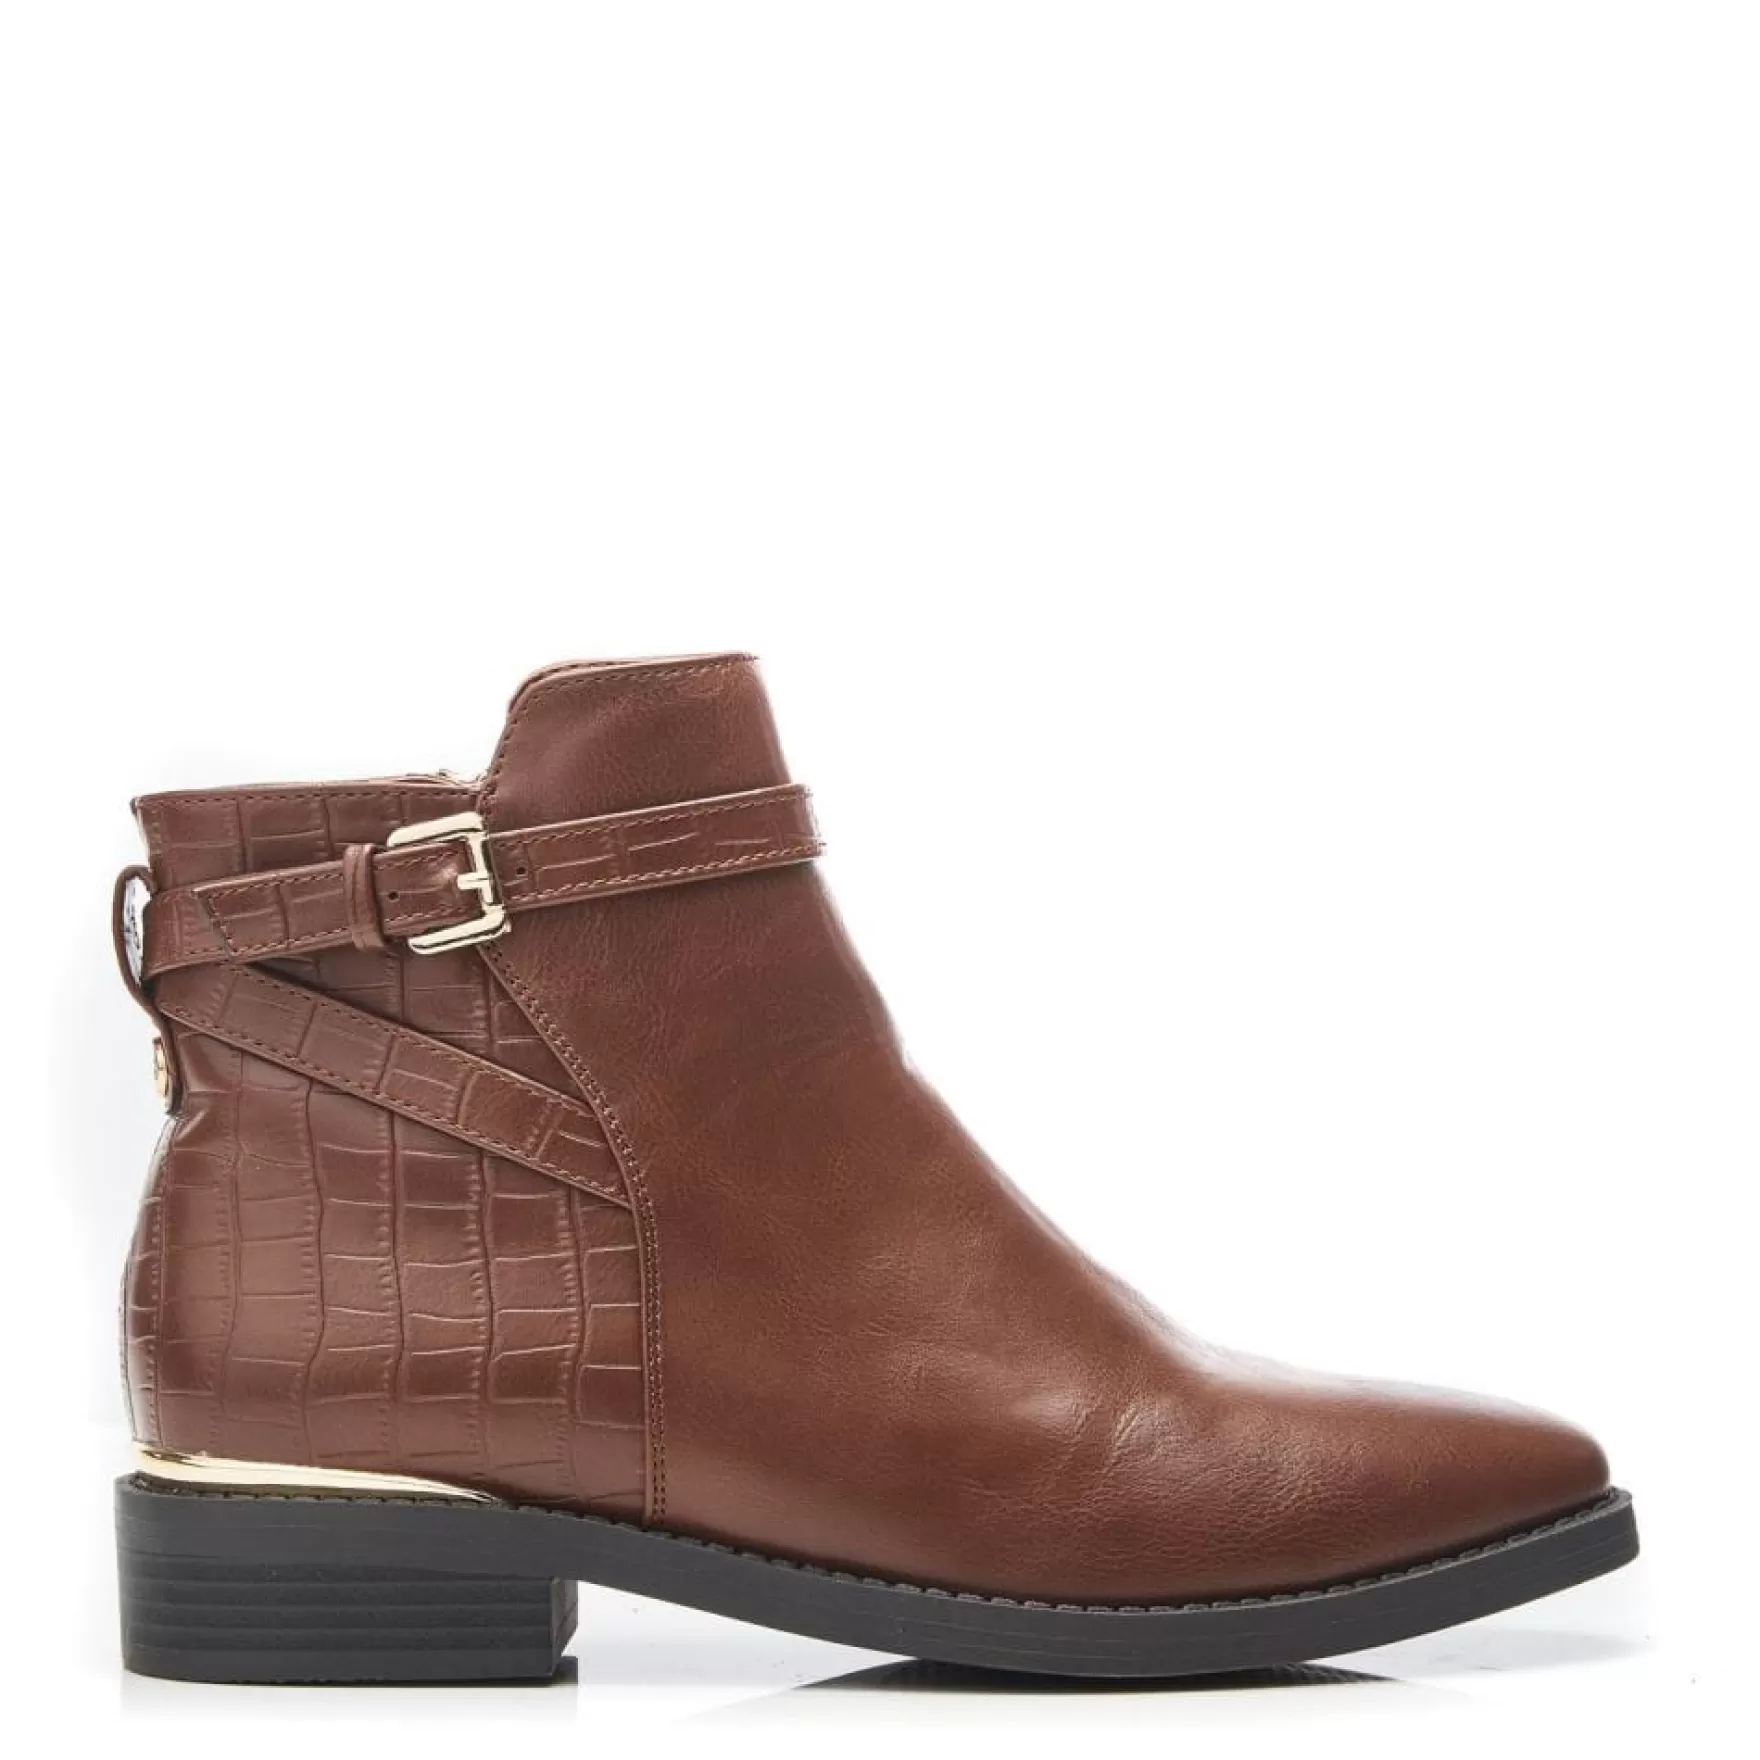 Ankle Boots*Moda in Pelle Ankle Boots